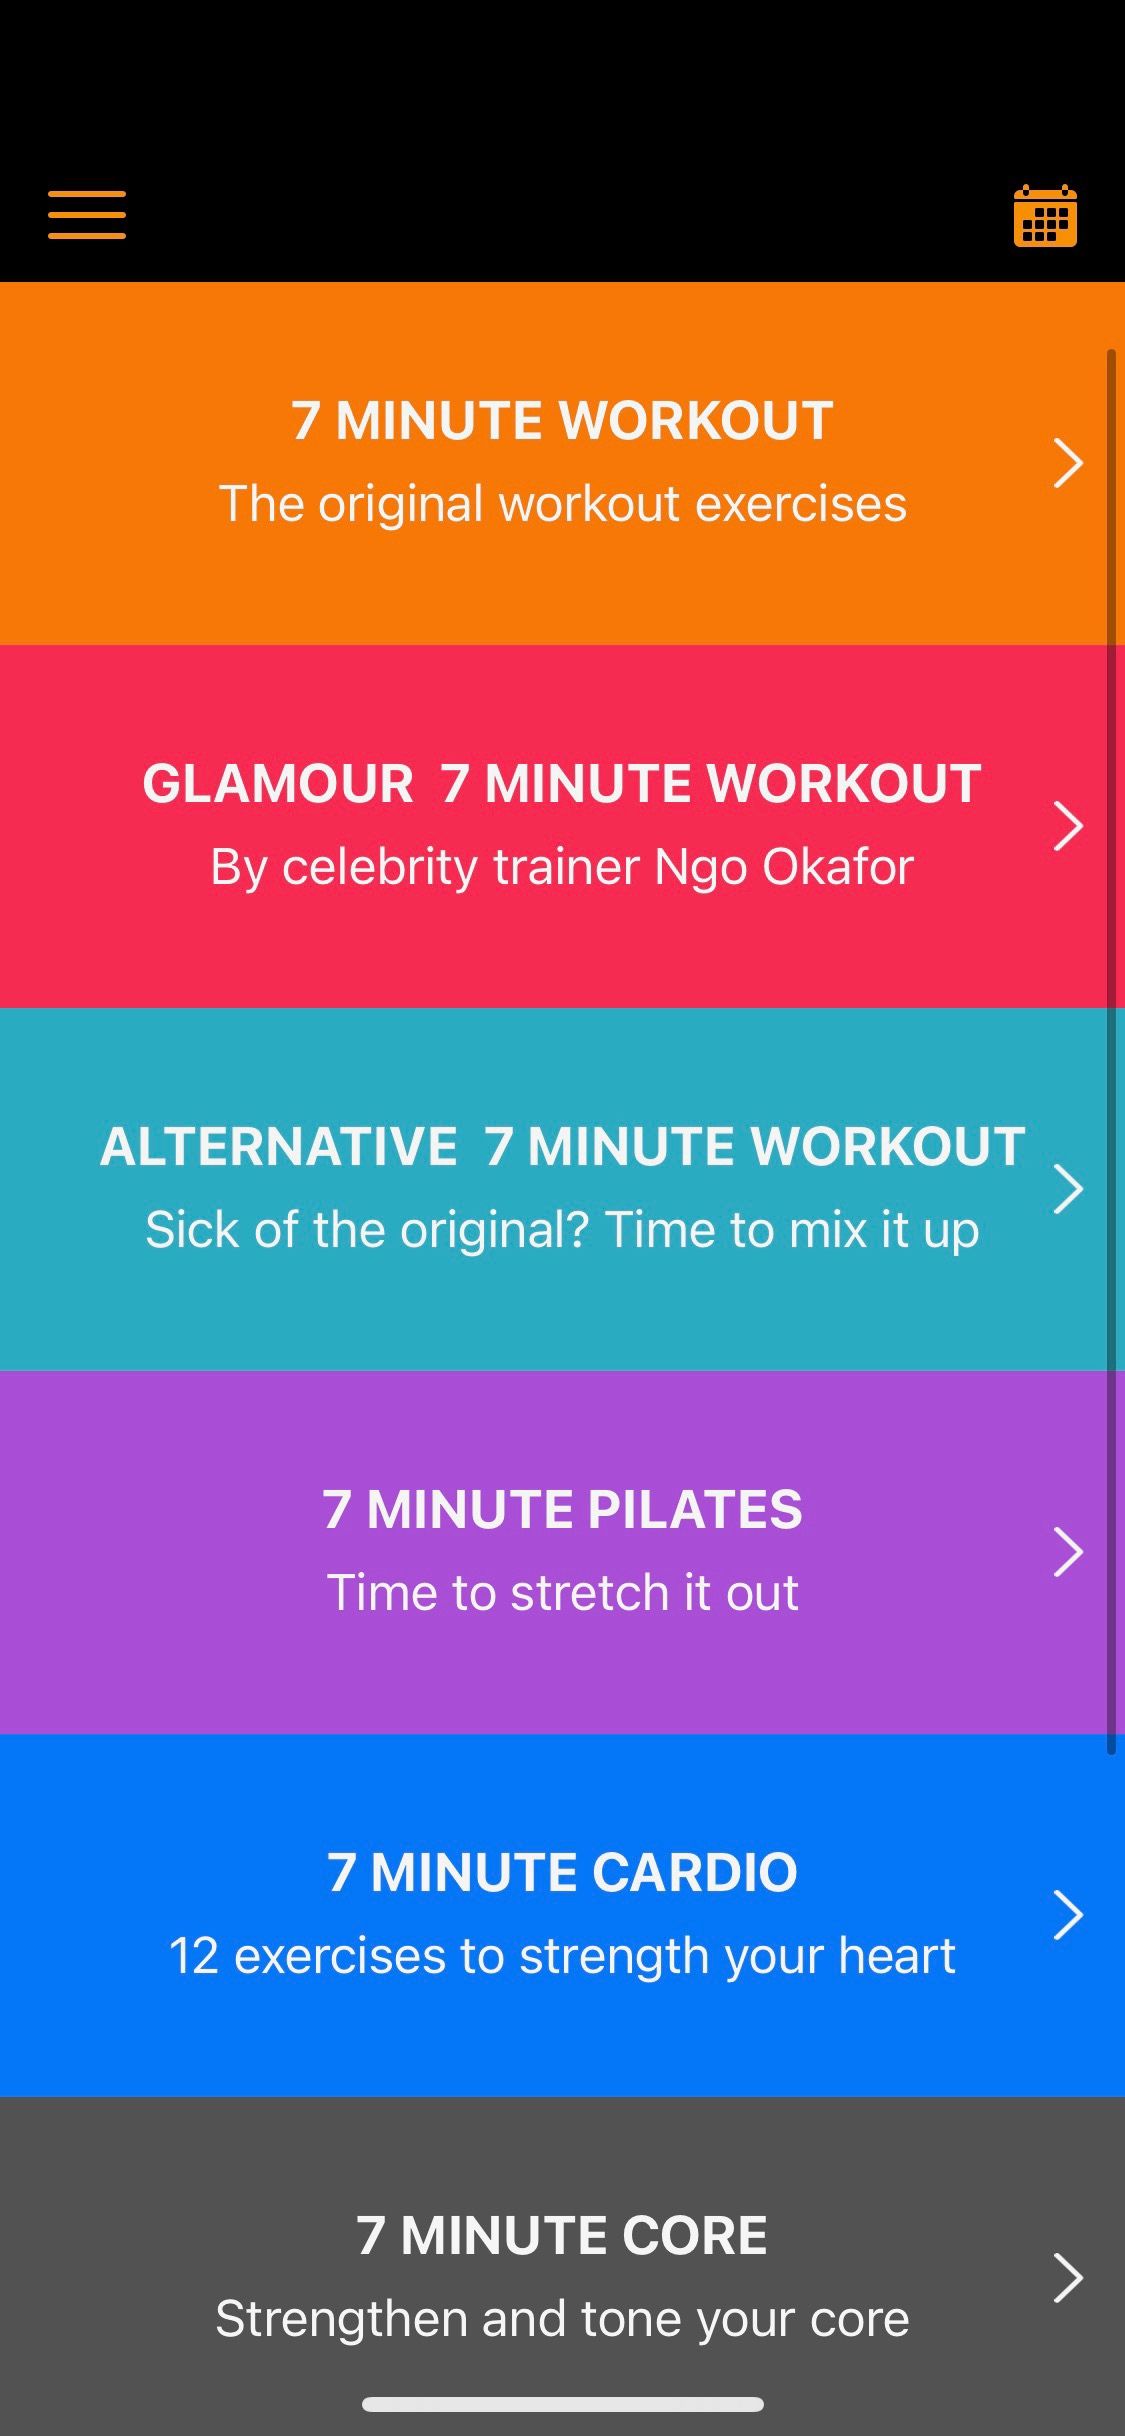 Screenshot of 7 Minute Workout app showing types of workouts